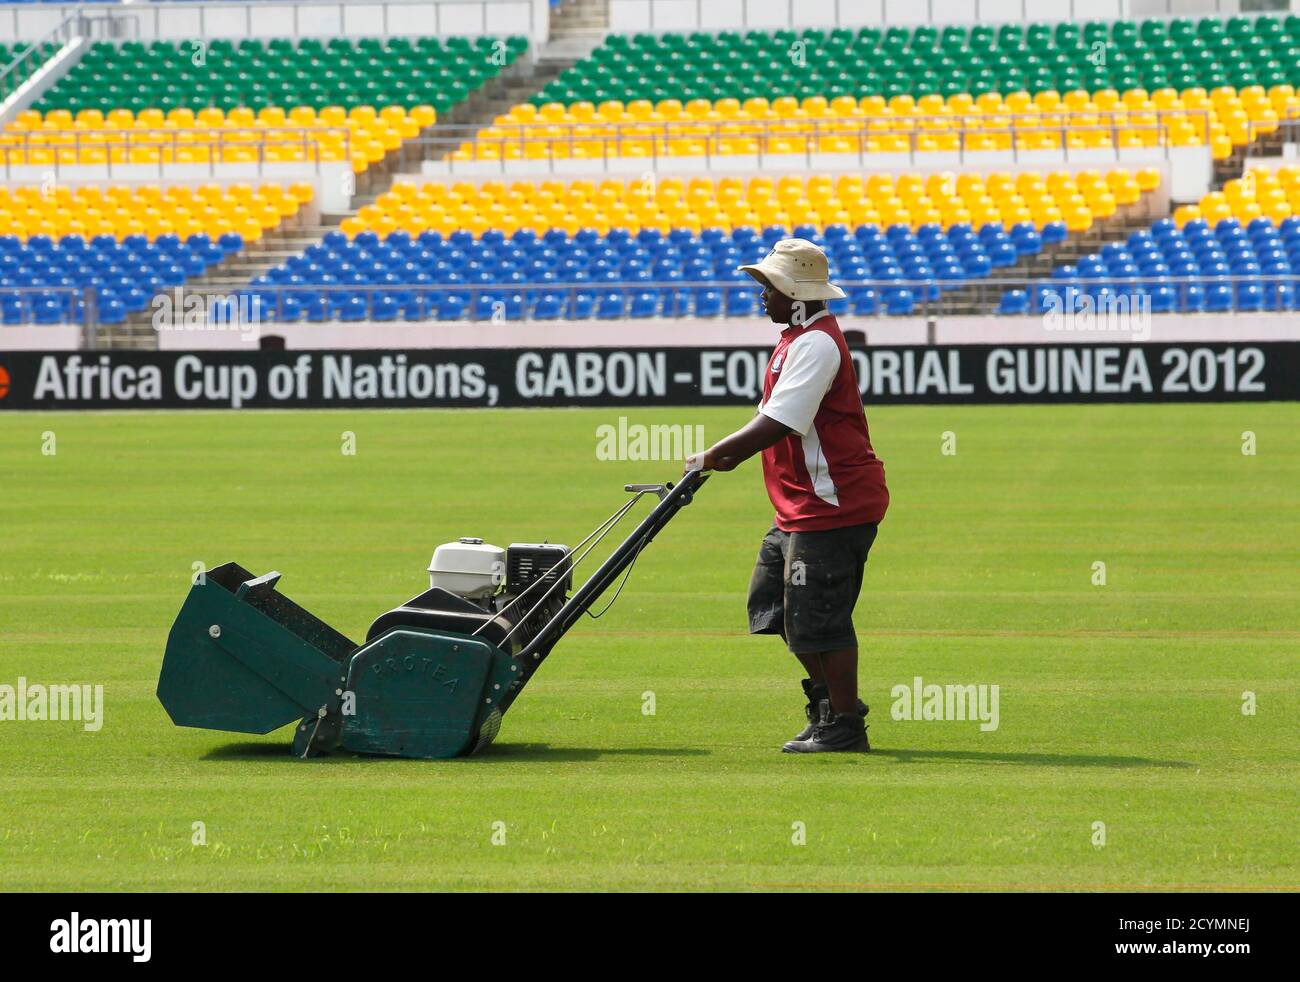 A field crew member prepares the grass at the Sino-Gabonese Friendship Stadium, which will host the final match for the African Nations Cup, in Libreville January 20, 2012. The African Nations Cup is being co-hosted by Equatorial Guinea and Gabon from January 21 to February 12. REUTERS/Louafi Larbi (Gabon - Tags: SPORT SOCCER) Stock Photo